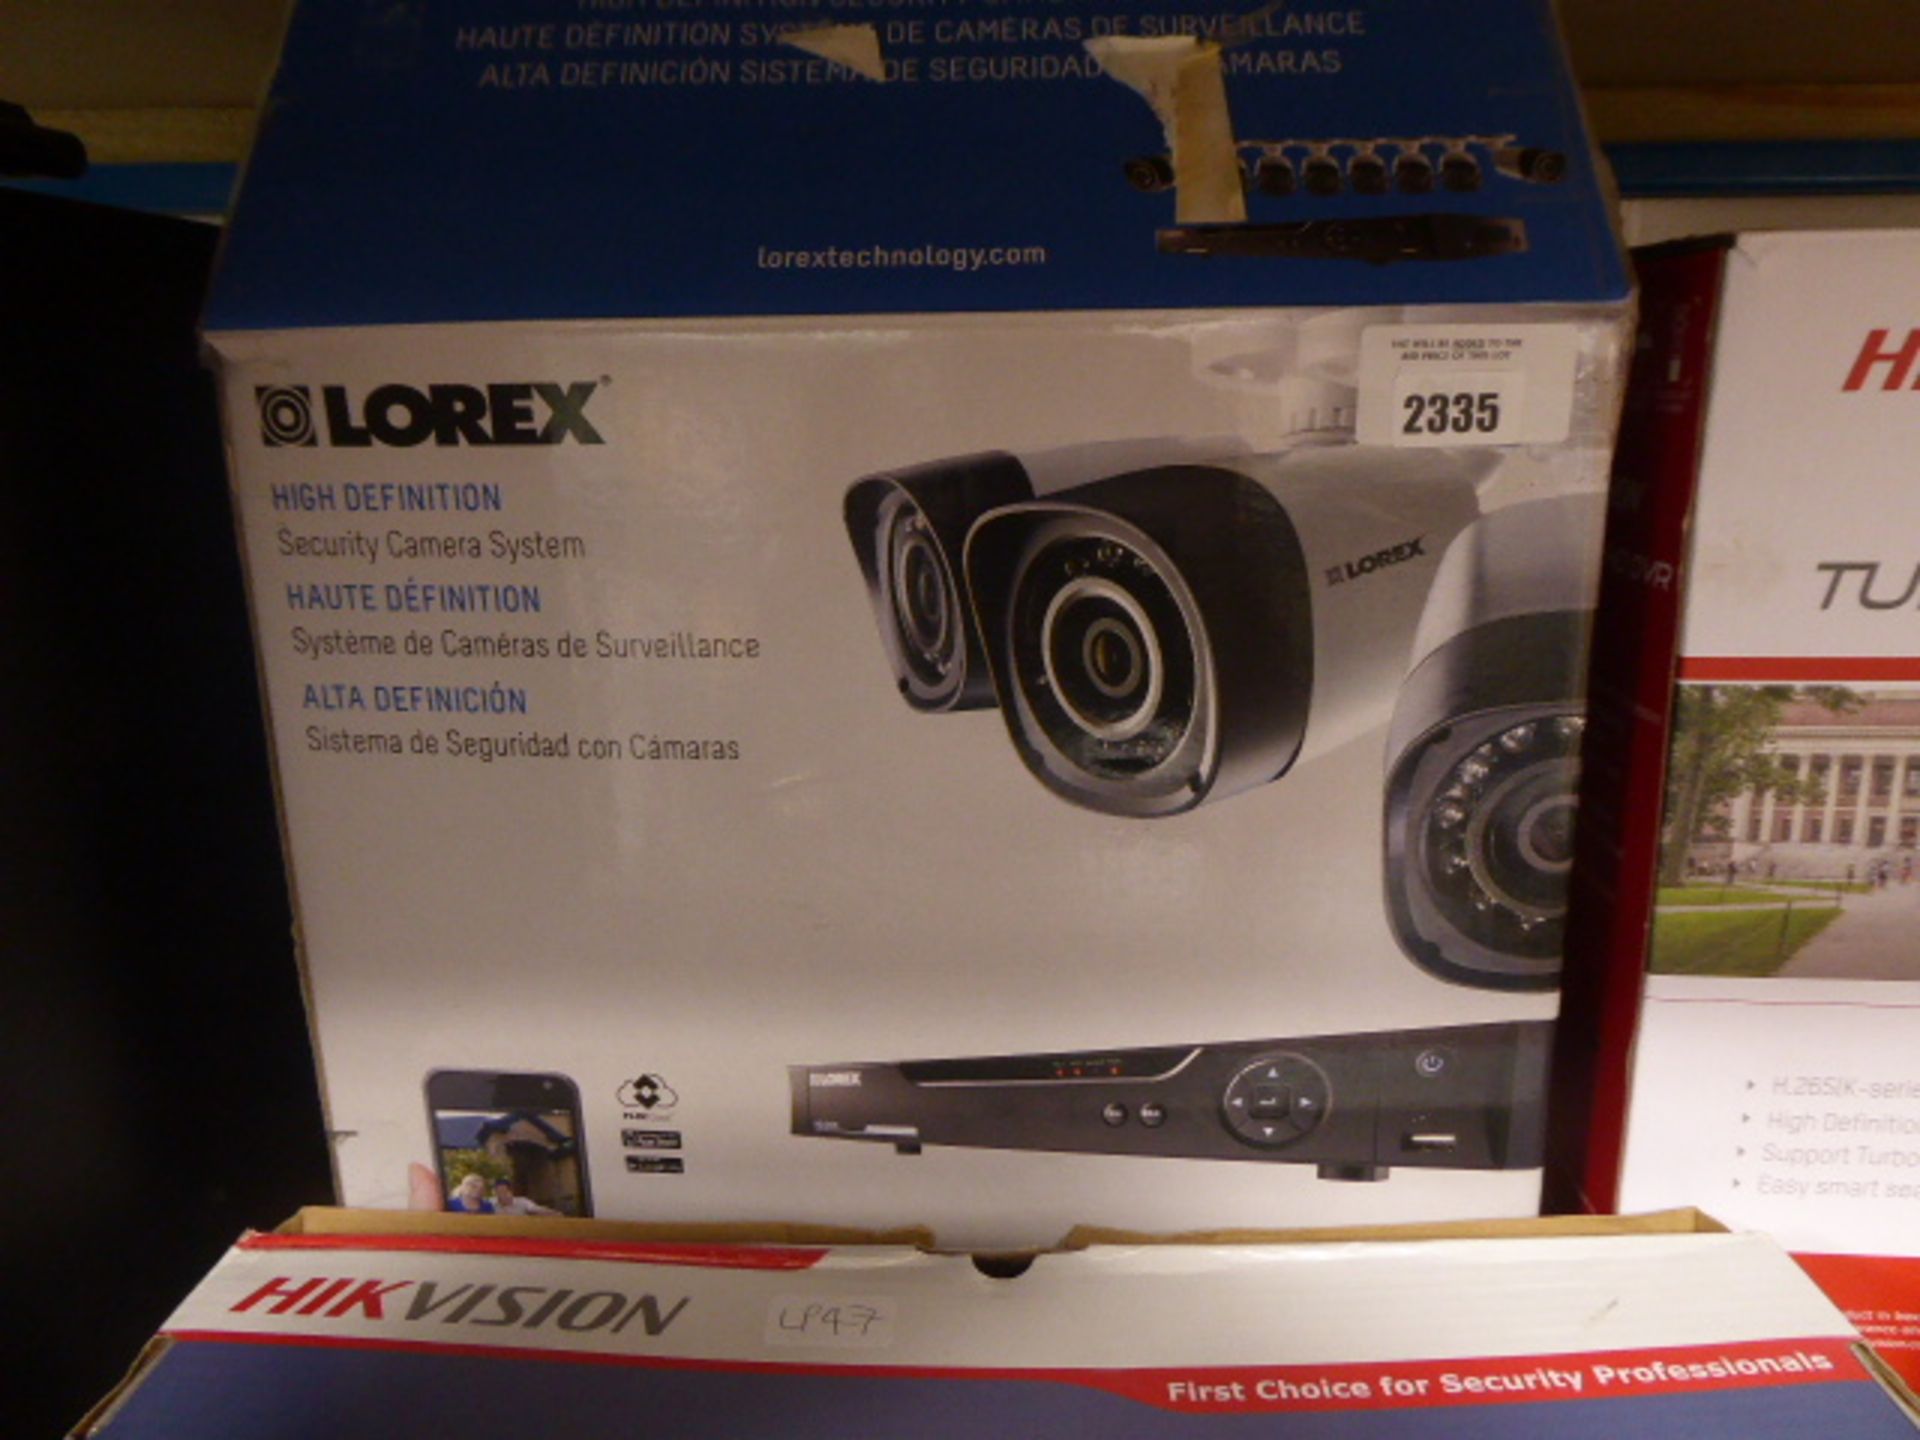 2158 Lorex high definition CCTV security system in box